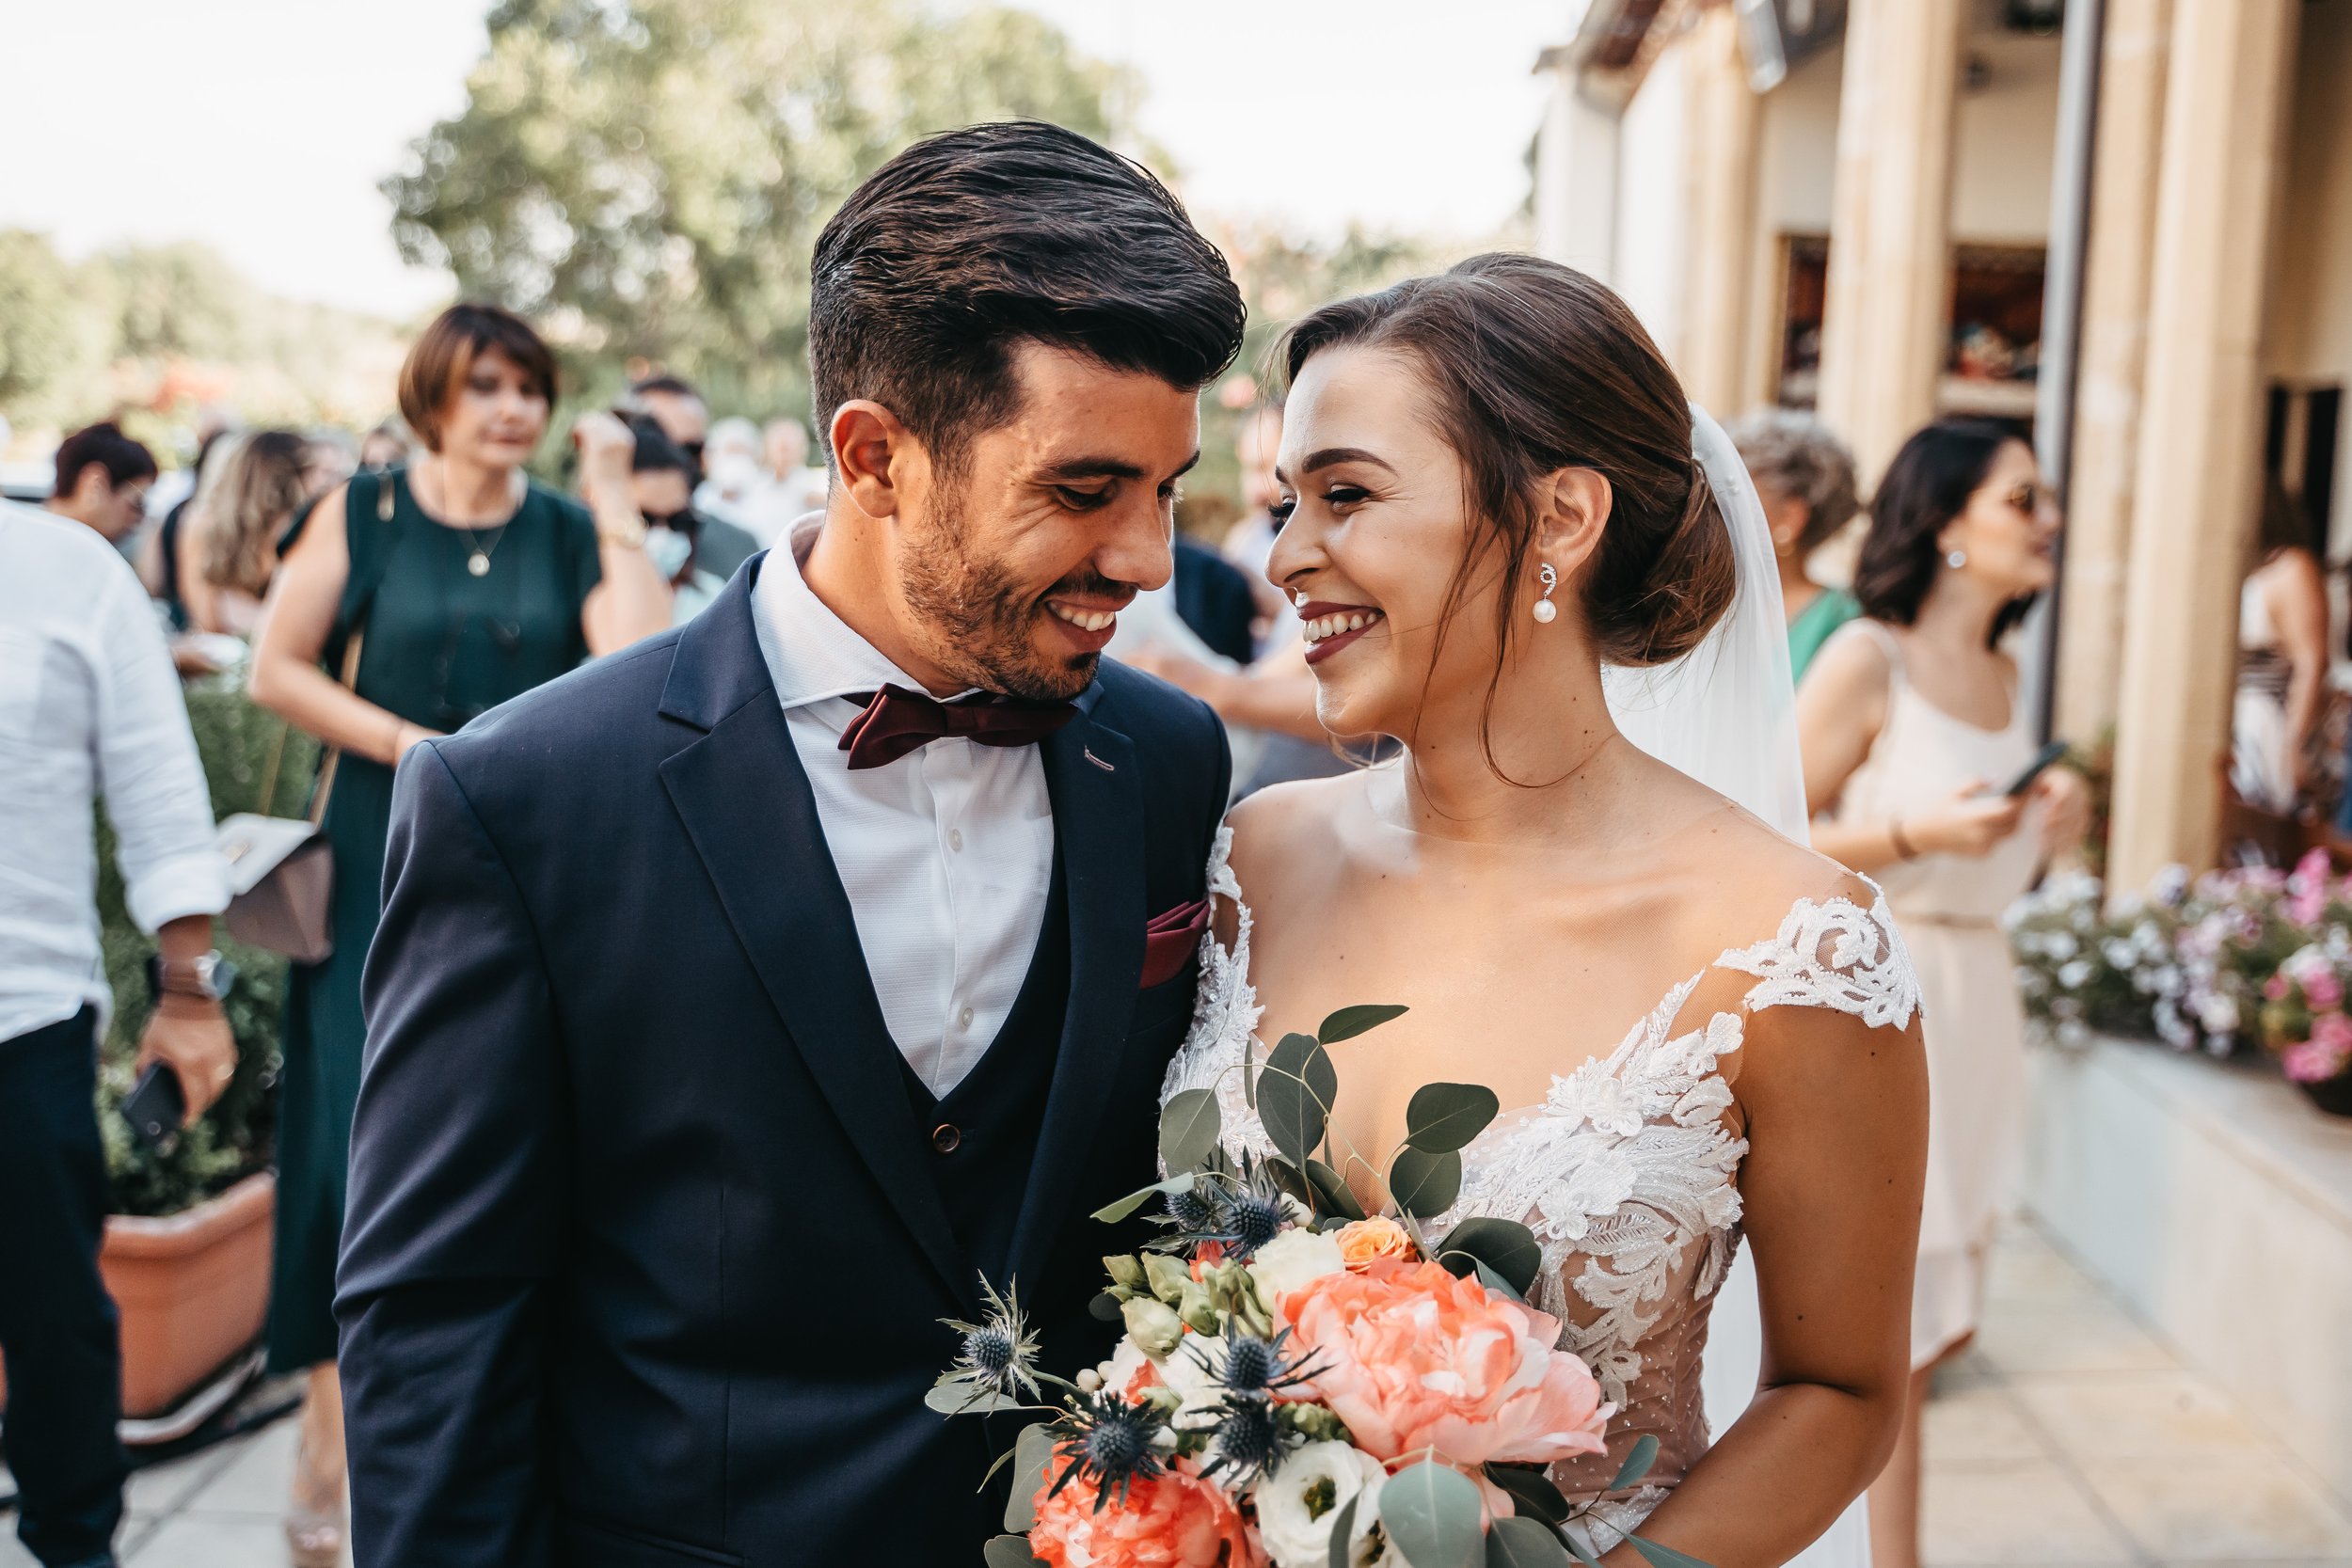 The bride and groom's intimate ceremony amidst the stunning landscapes of Cyprus was a sight to behold, our skilled photographer capturing every moment with artful photos.